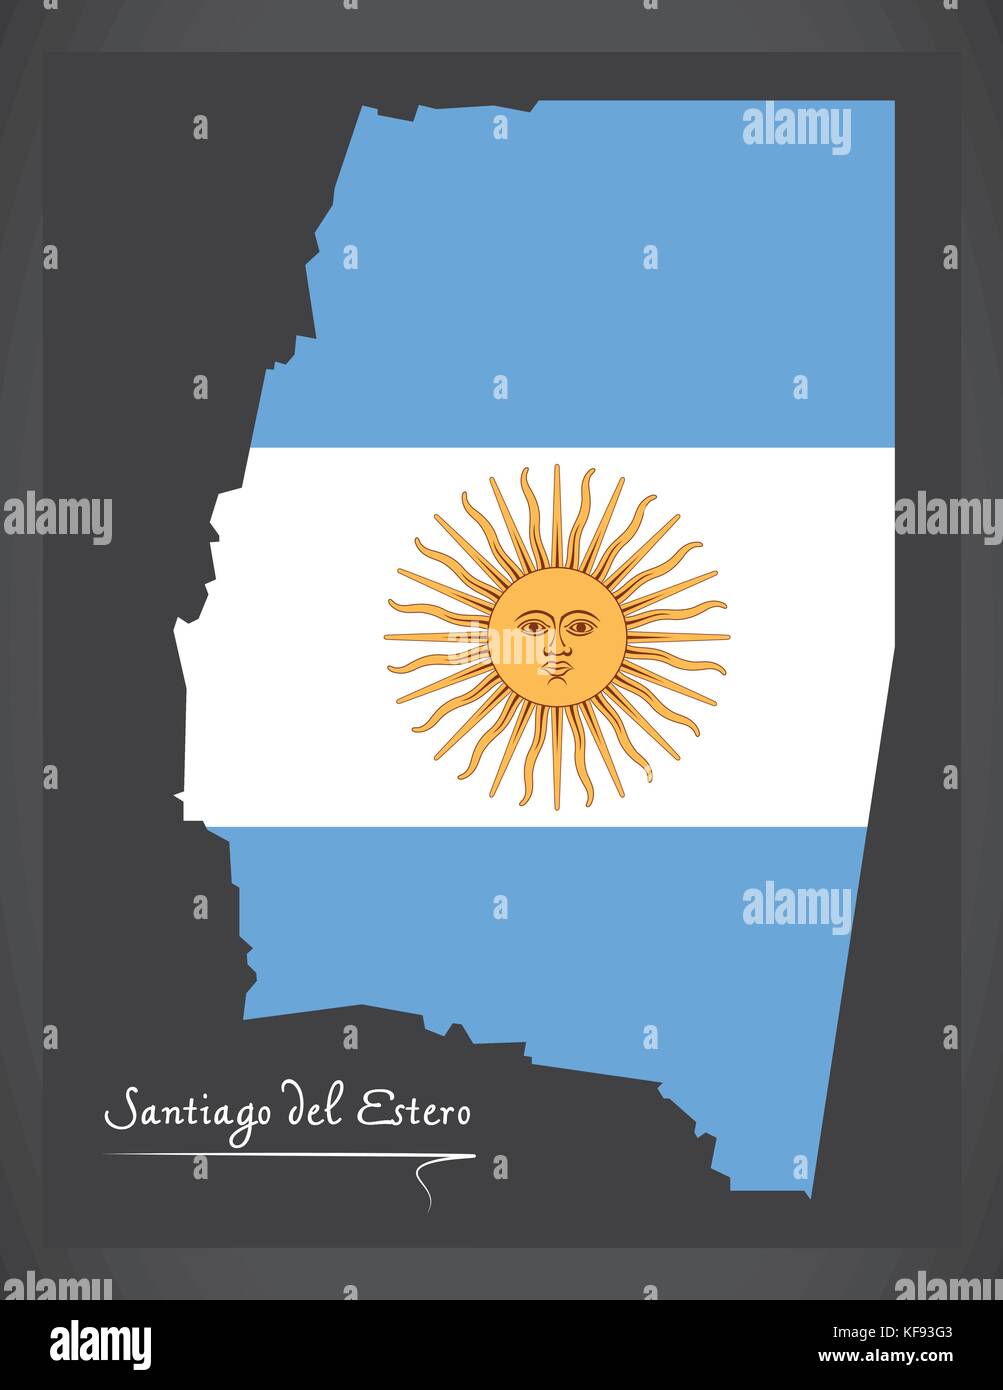 Santiago del Estero map of Argentina with Argentinian national flag illustration Stock Vector